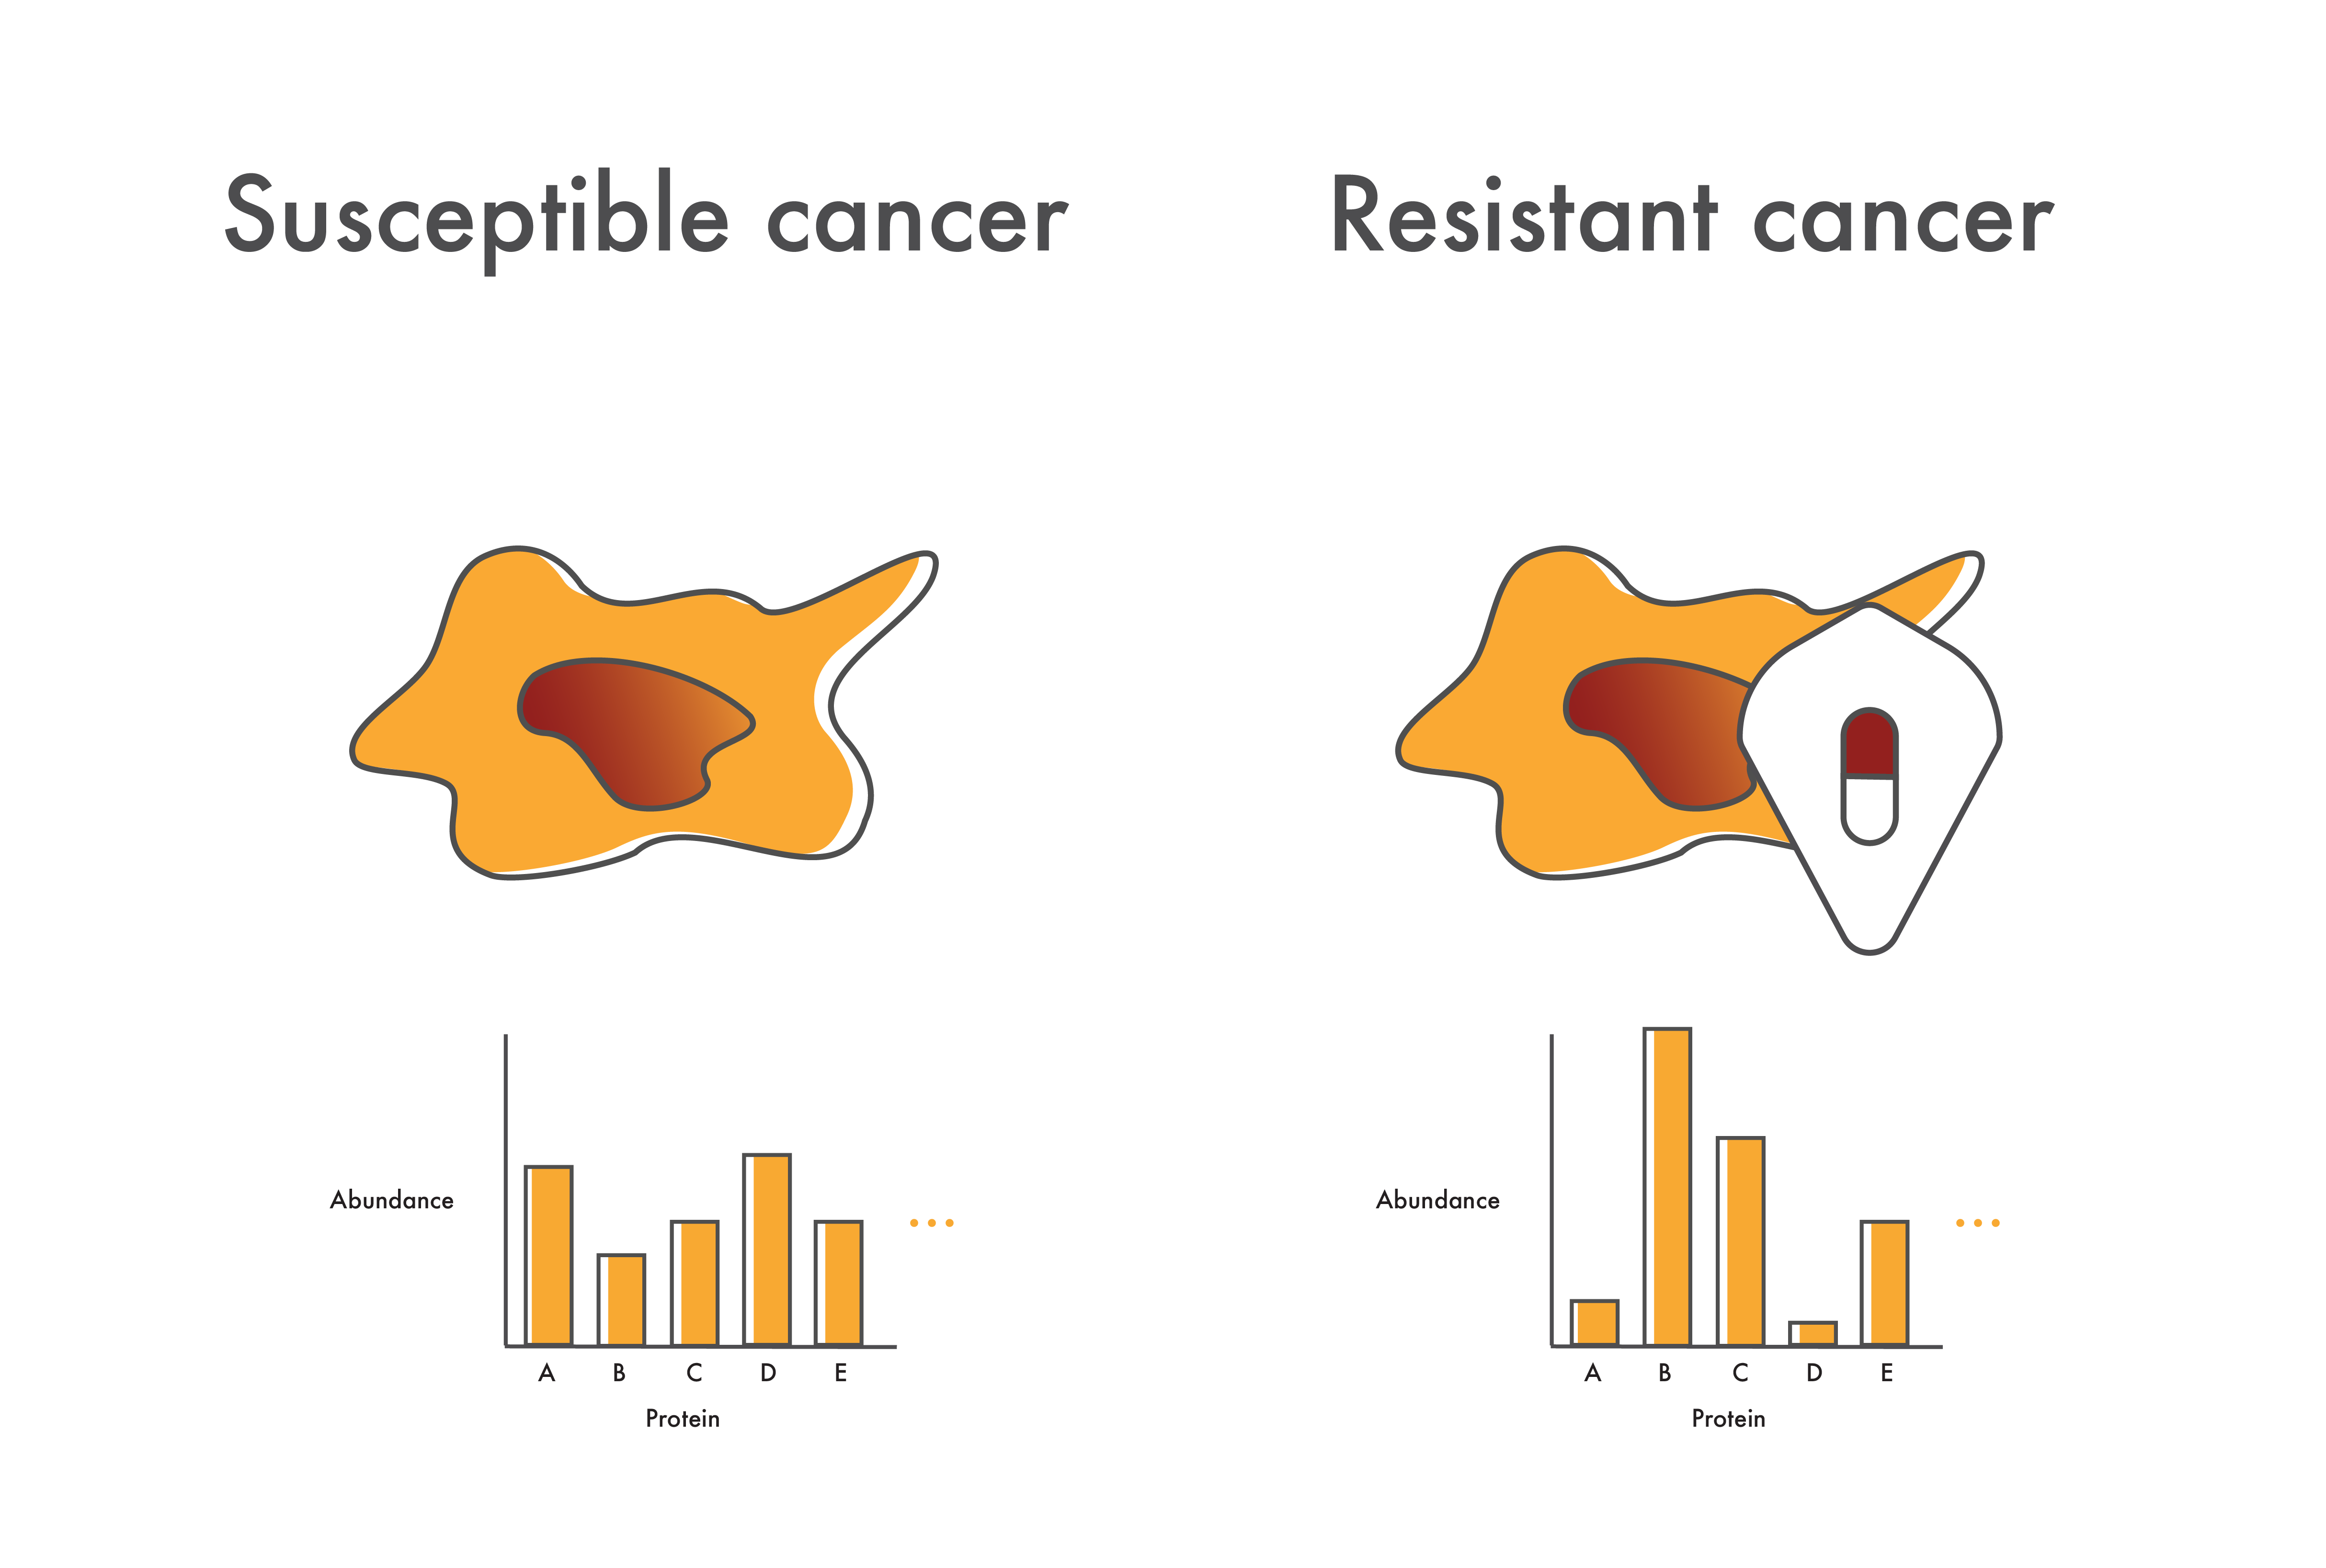 Proteome profiles of drug resistant and susceptible cancer cells